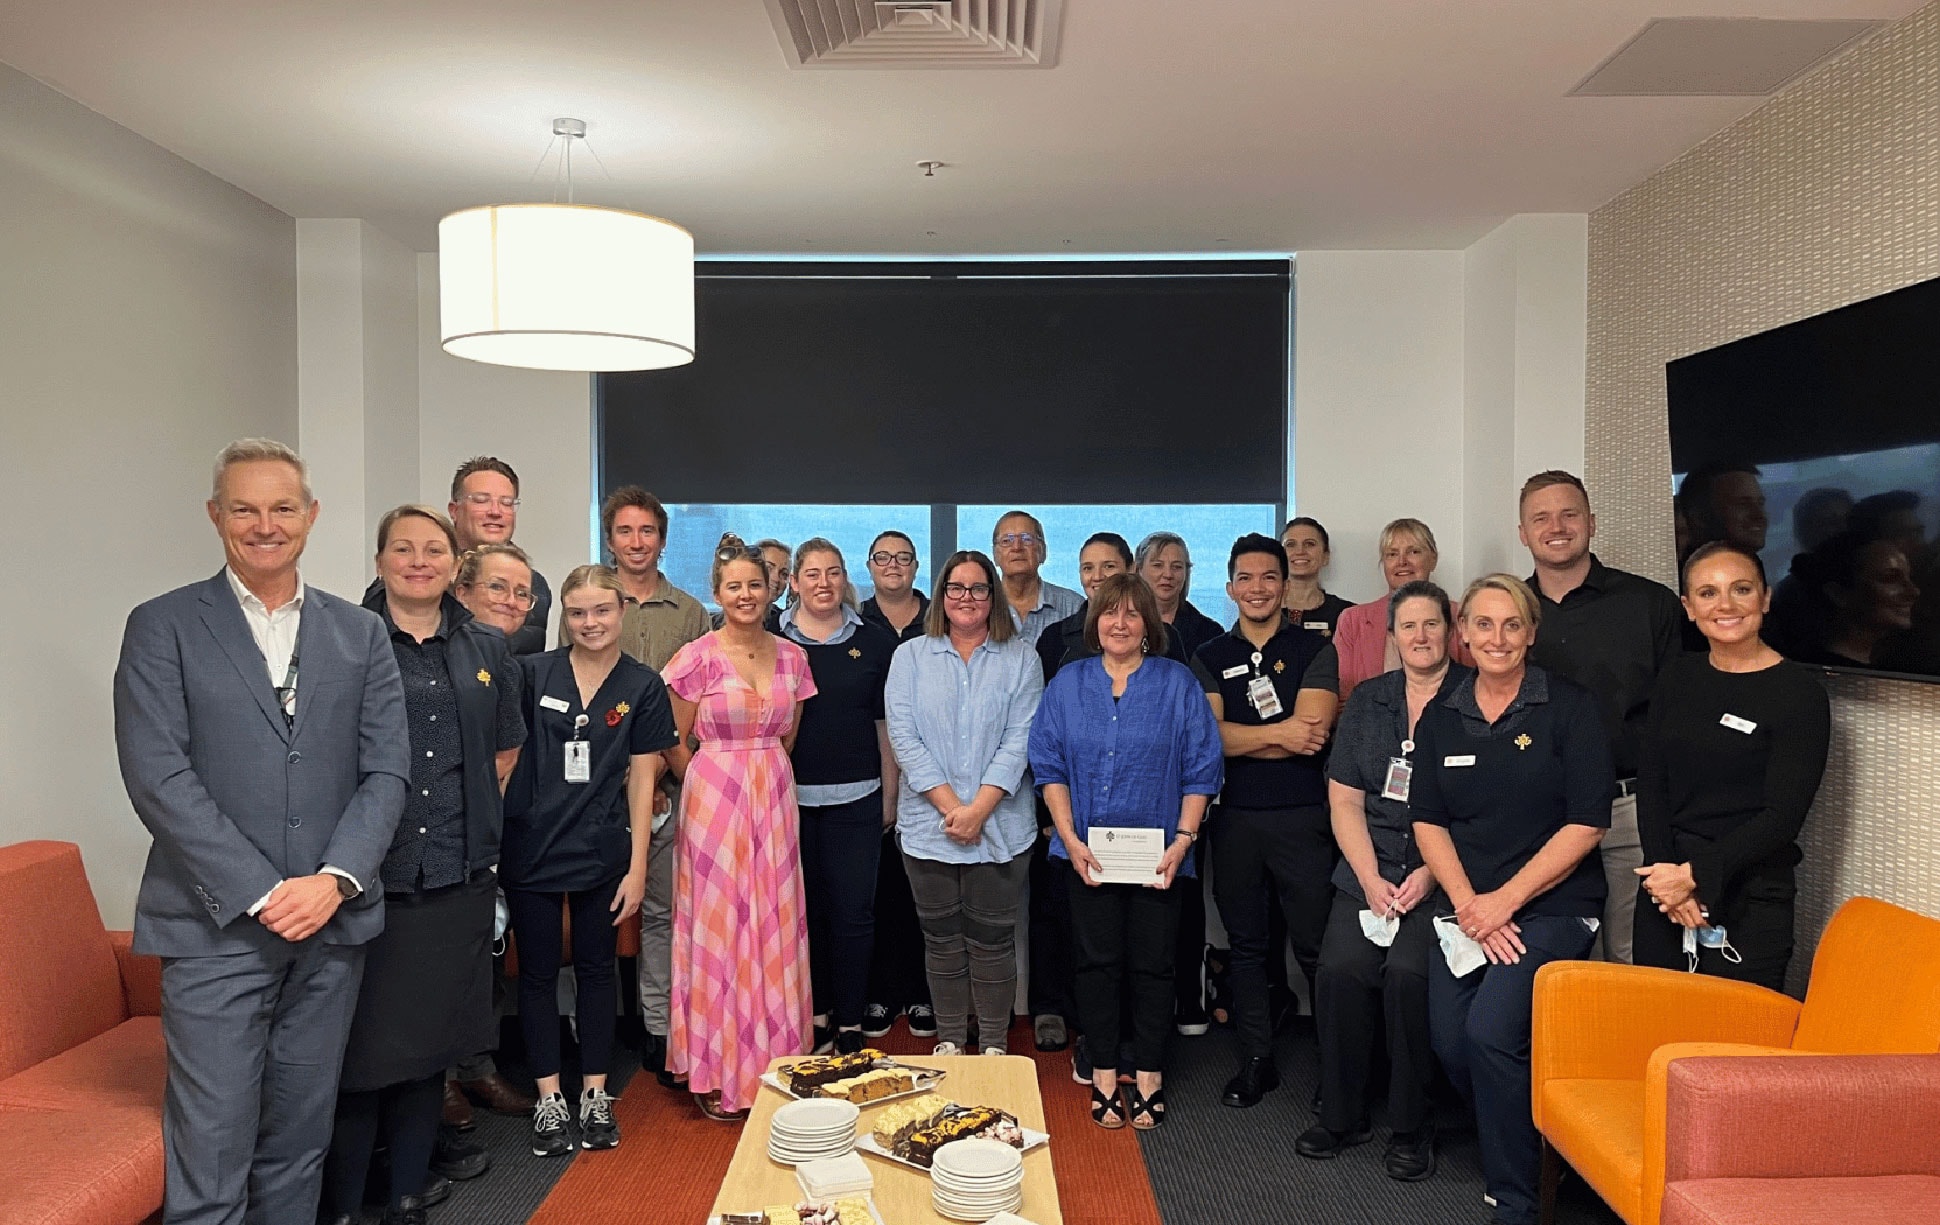 Gorrie family (pictured centre) meeting with caregivers at St John of God Geelong Hospital